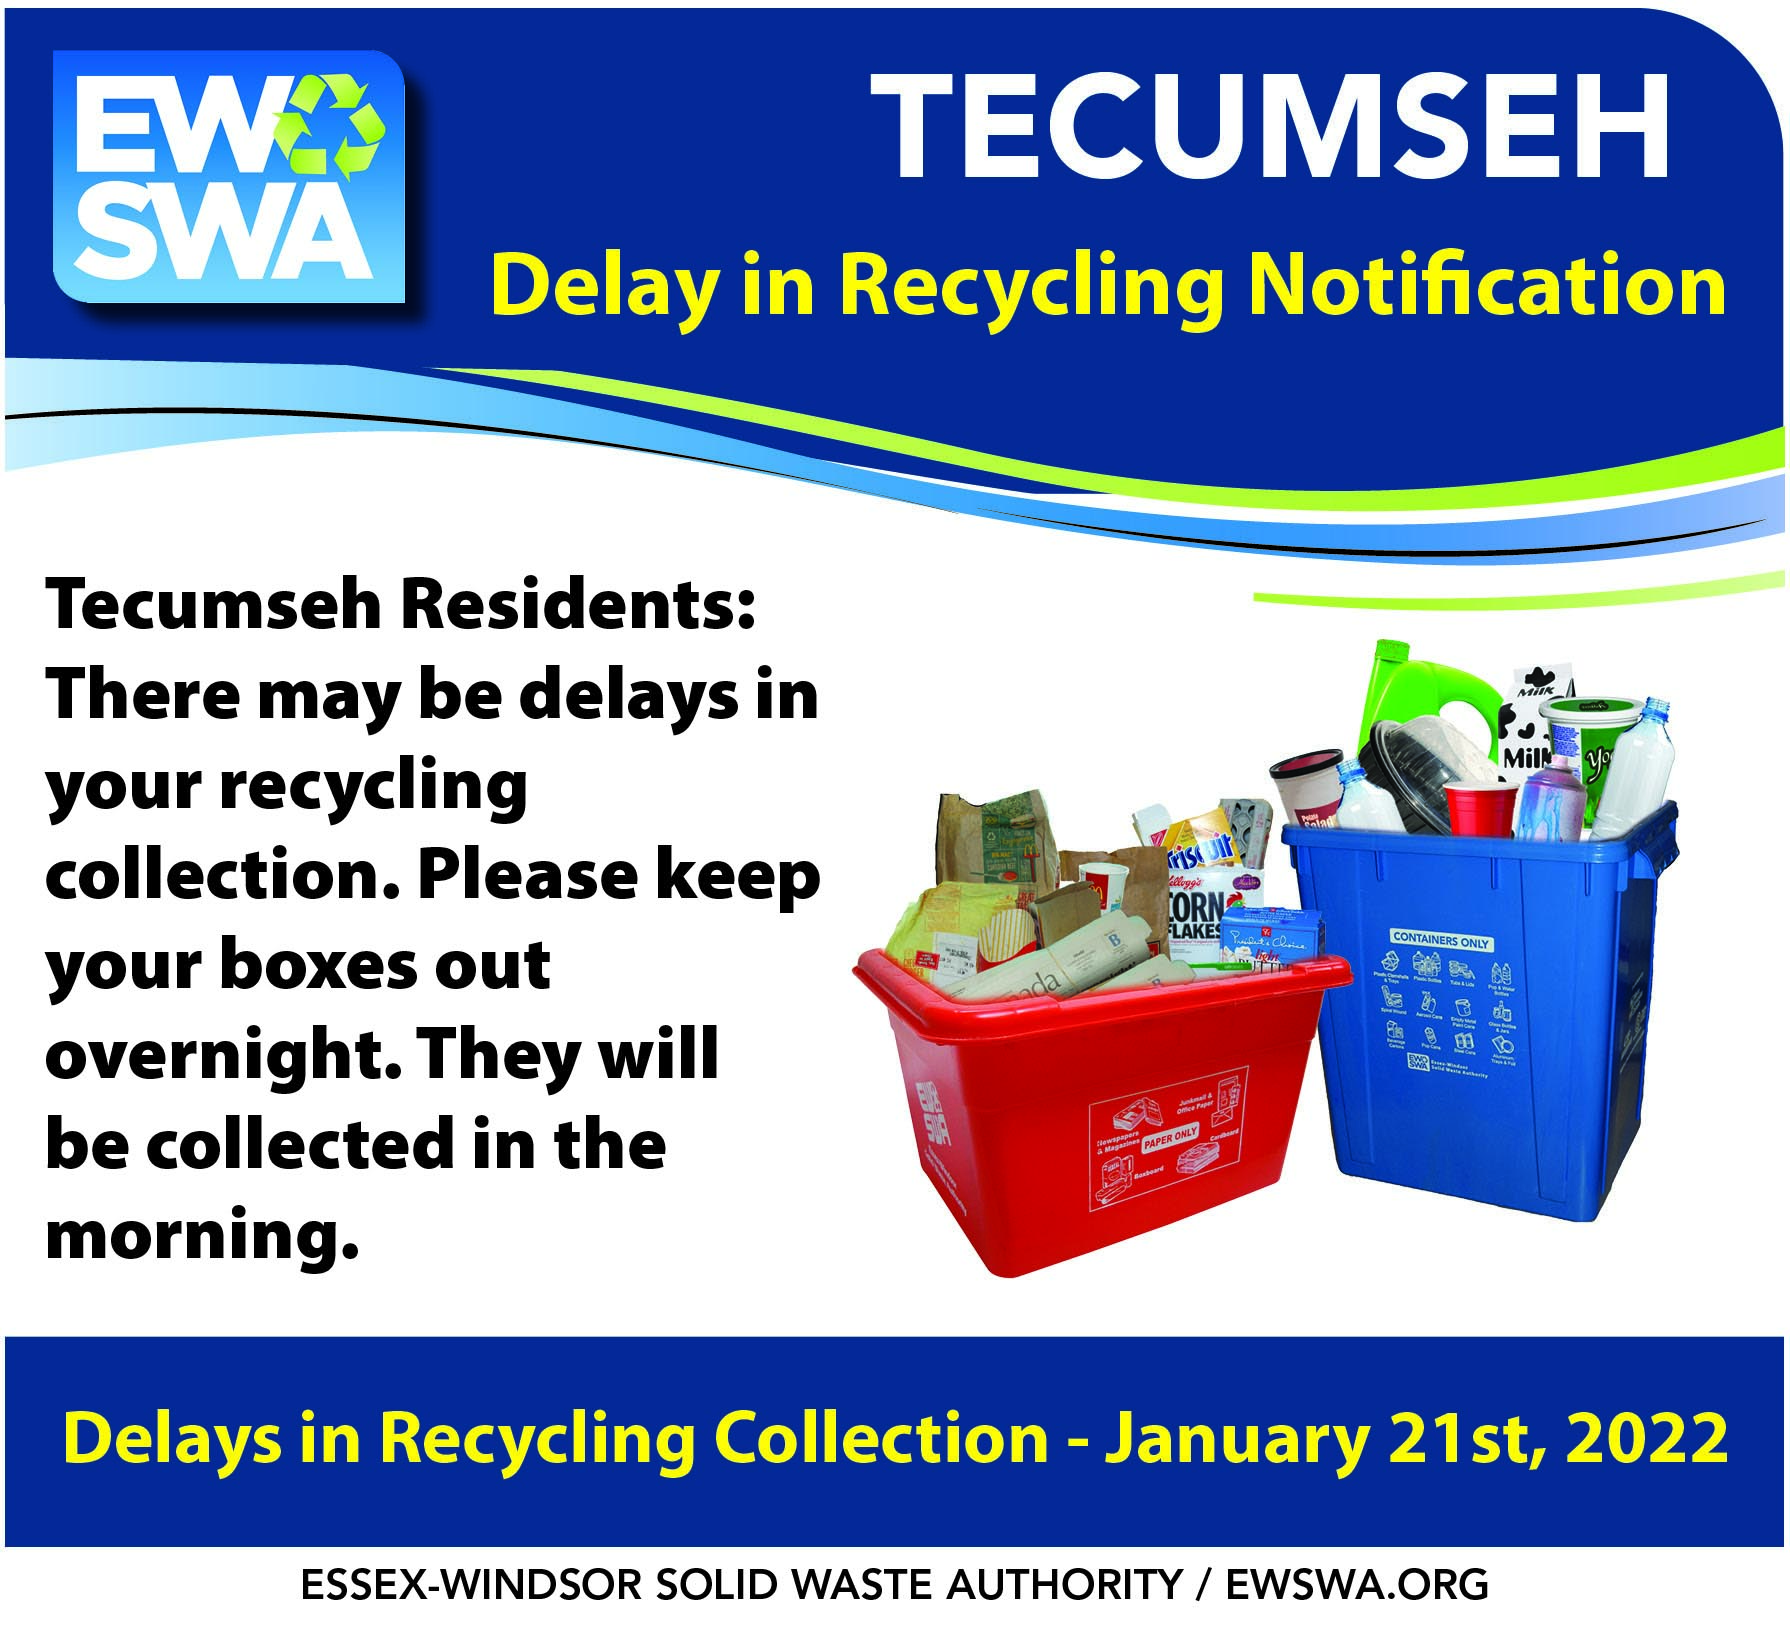 Delayed REcycle collection Jan 21, 2022